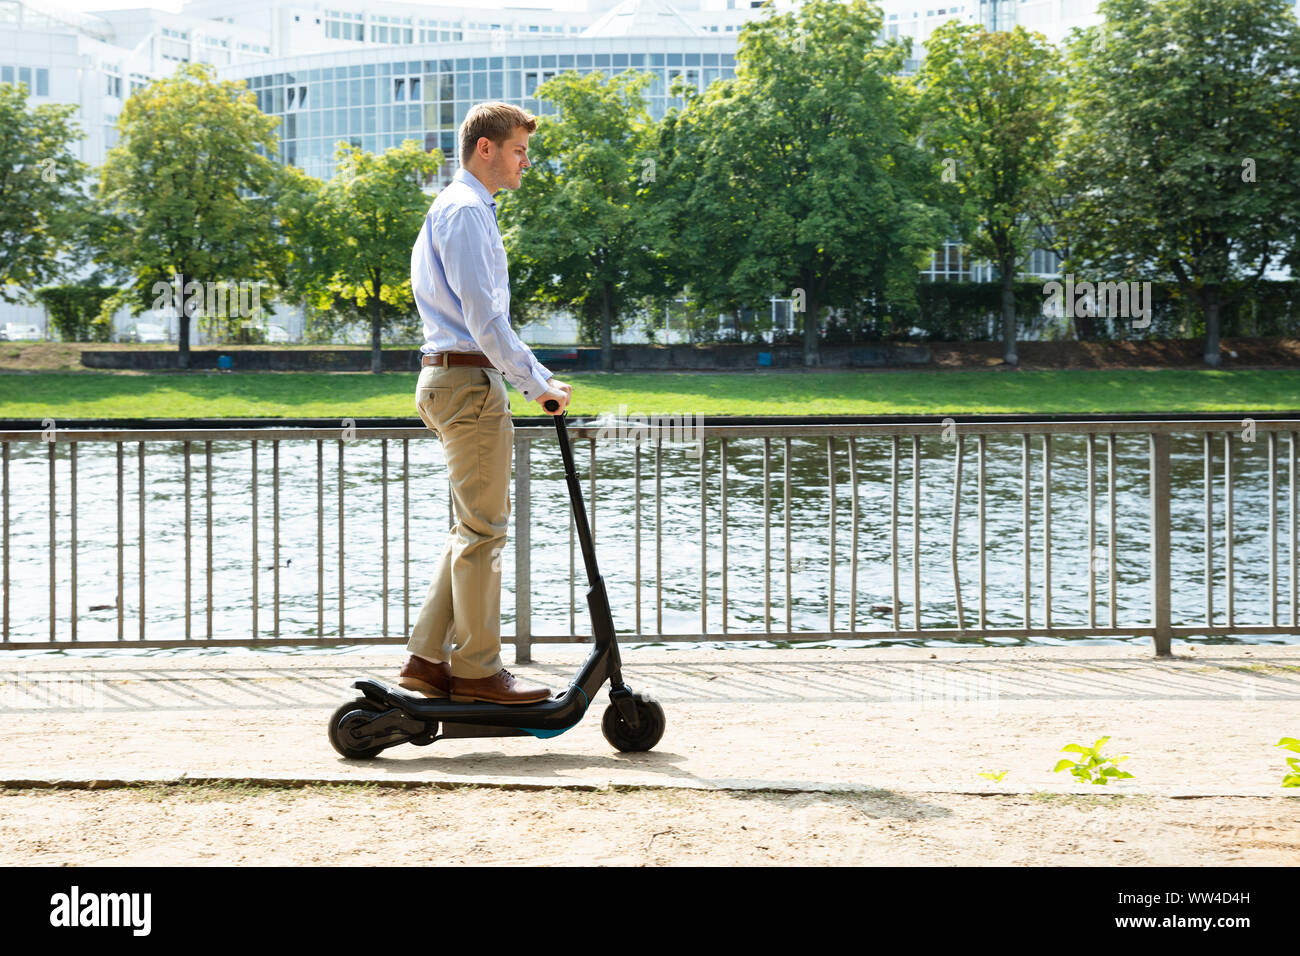 Young Man Riding An Electric Kick Scooter Stock Photo